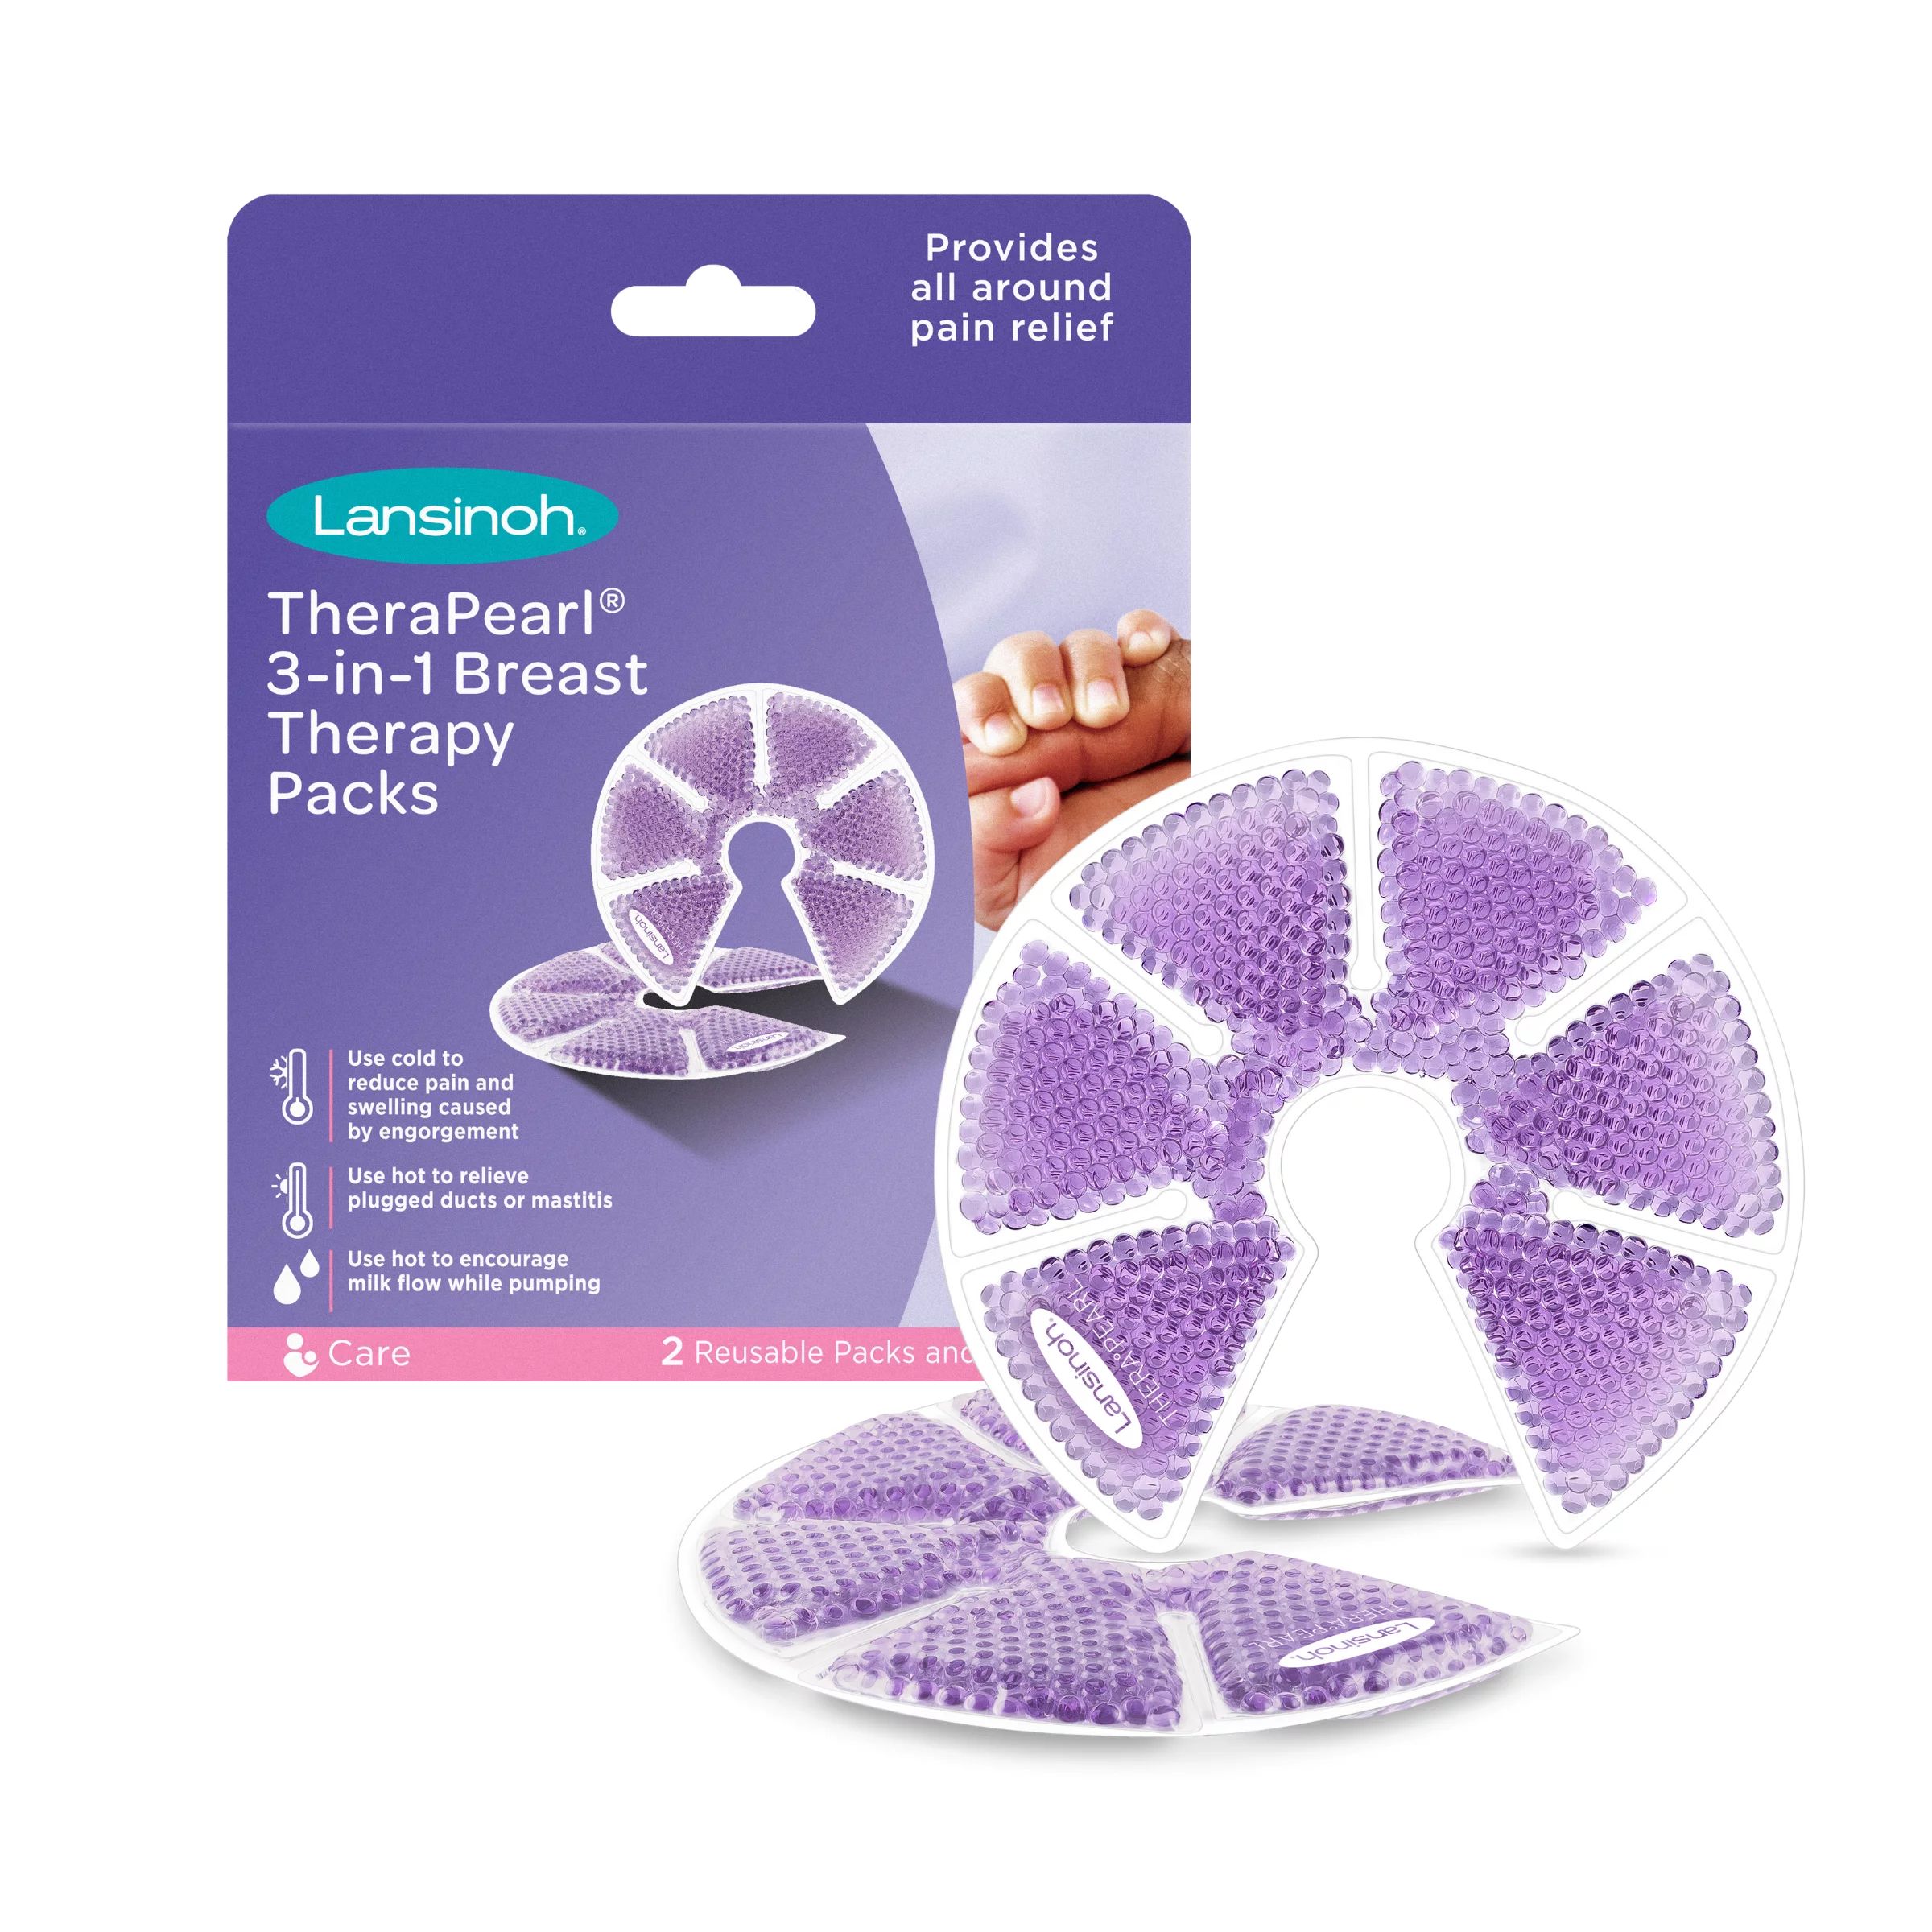 Lansinoh TheraPearl 3-in-1 Breast Therapy Pack with Covers, 2 Pack | Walmart (US)